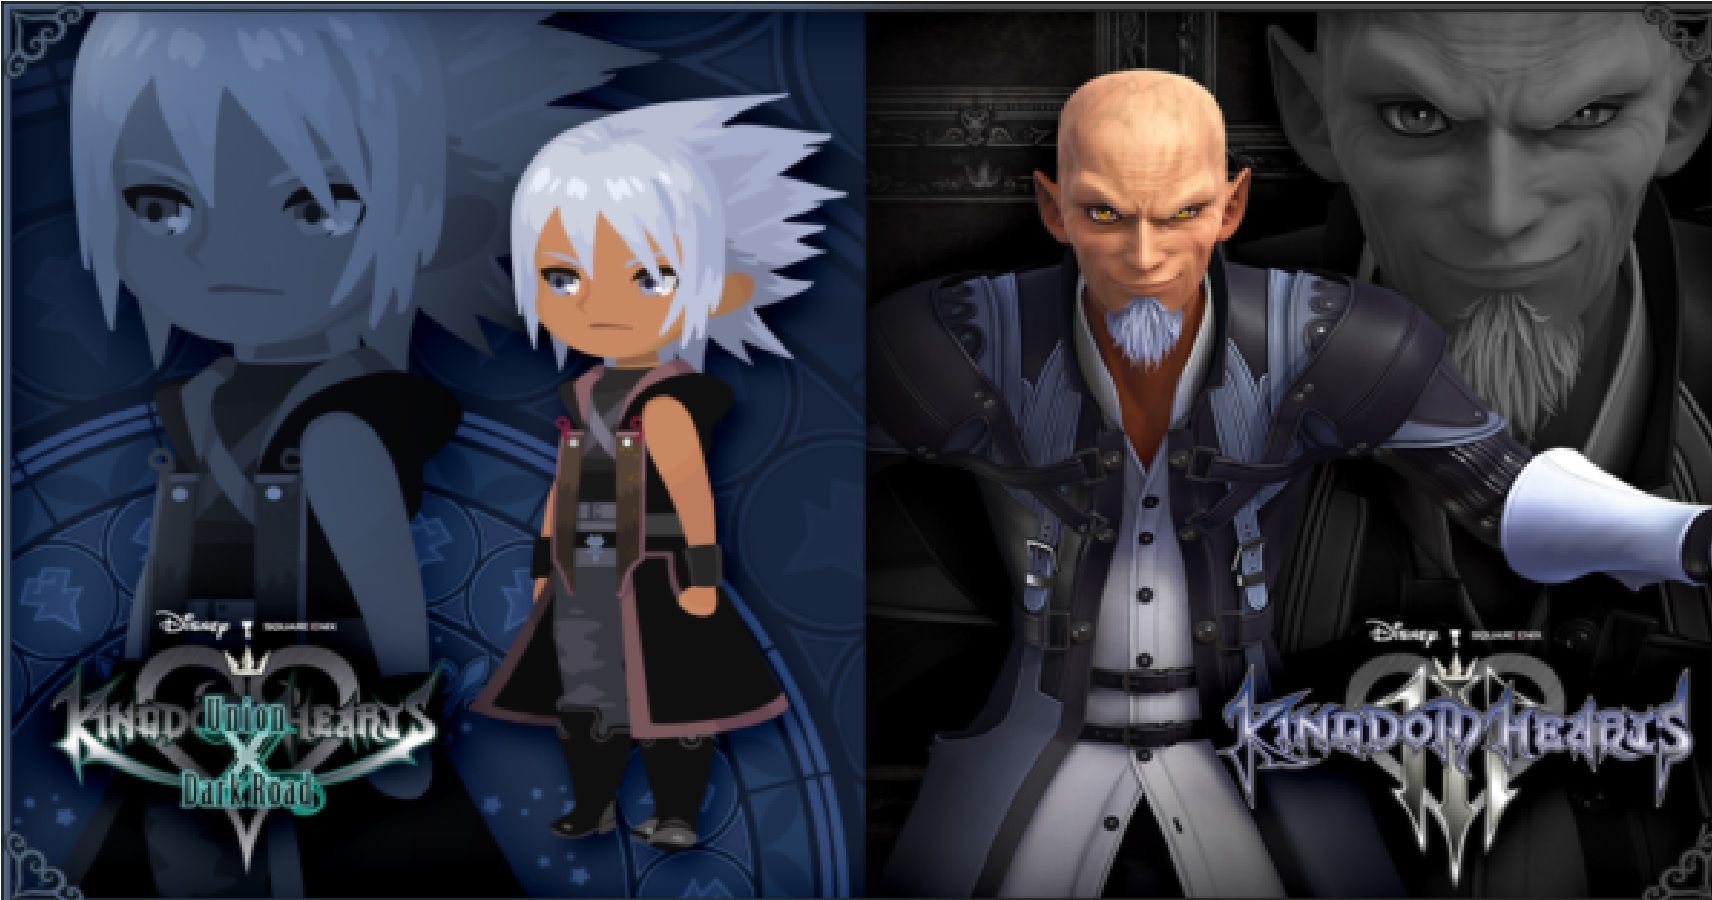 Here S Your First Look At Kingdom Hearts Dark Road Thegamer